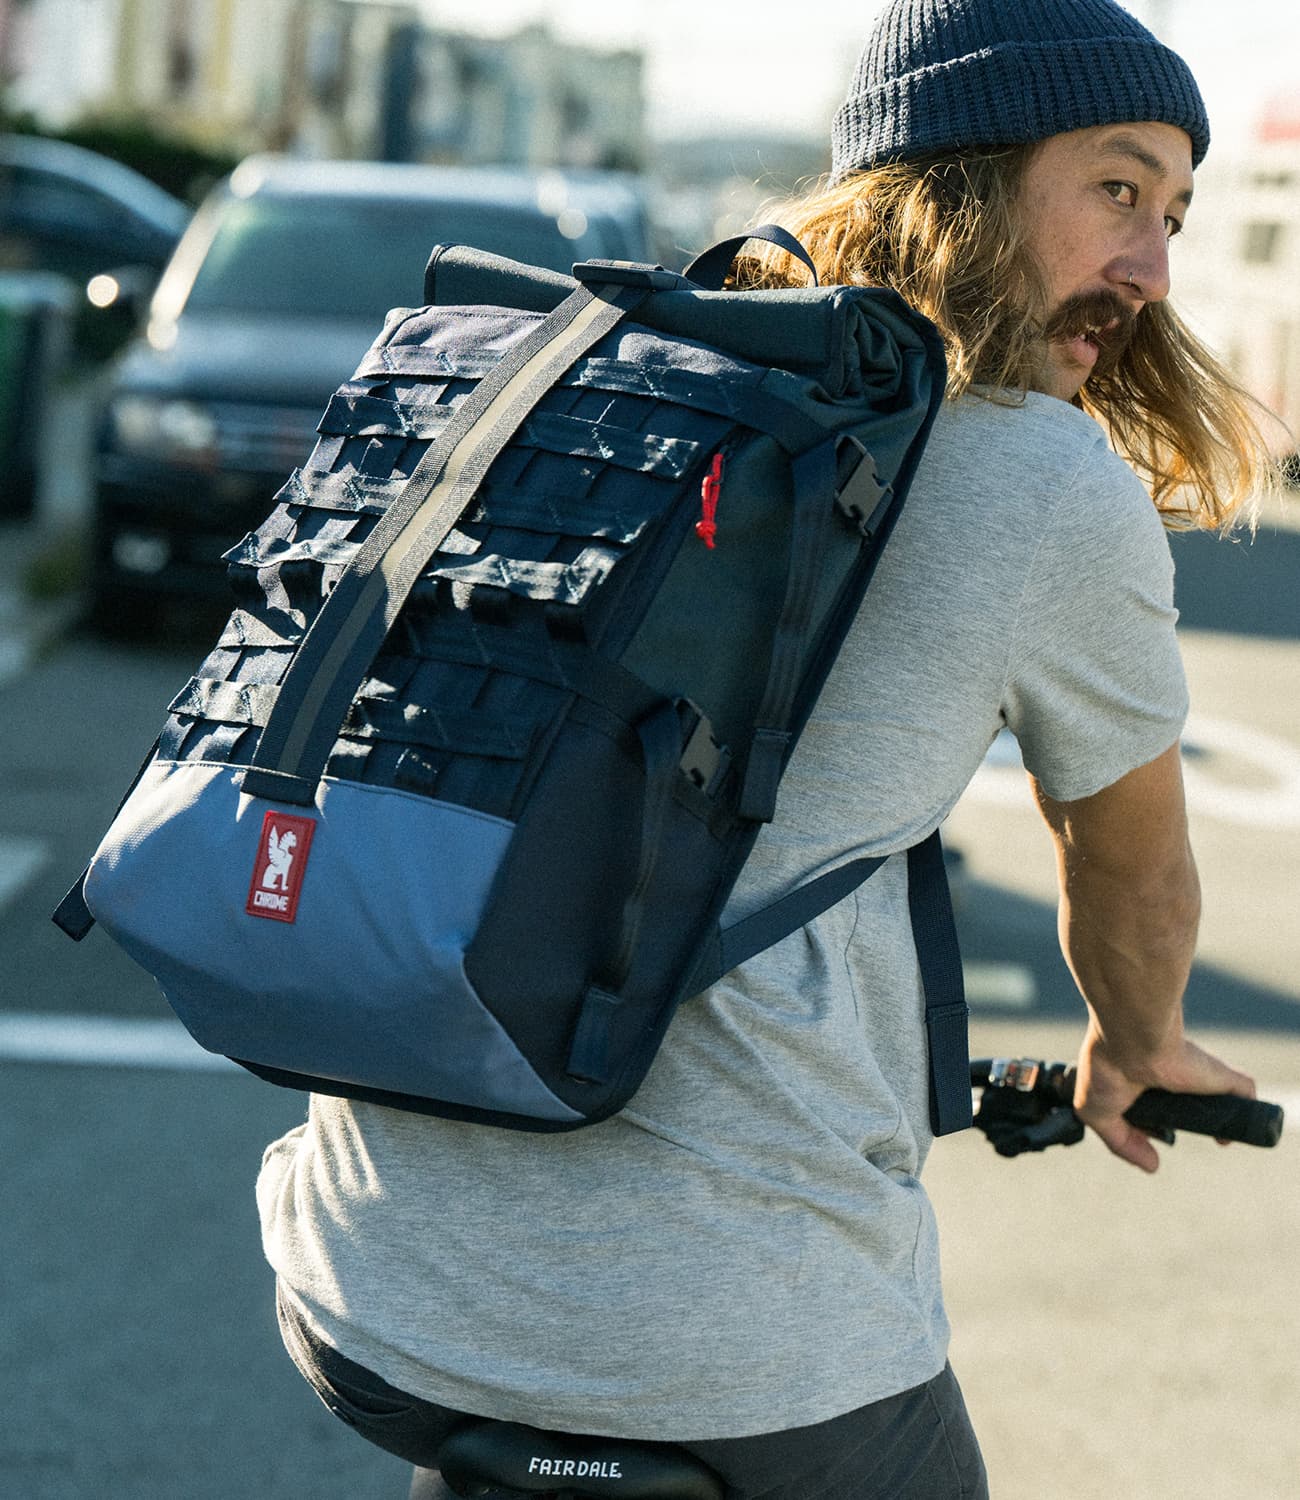 Barrage Cargo Backpack in blue worn by a person cycling